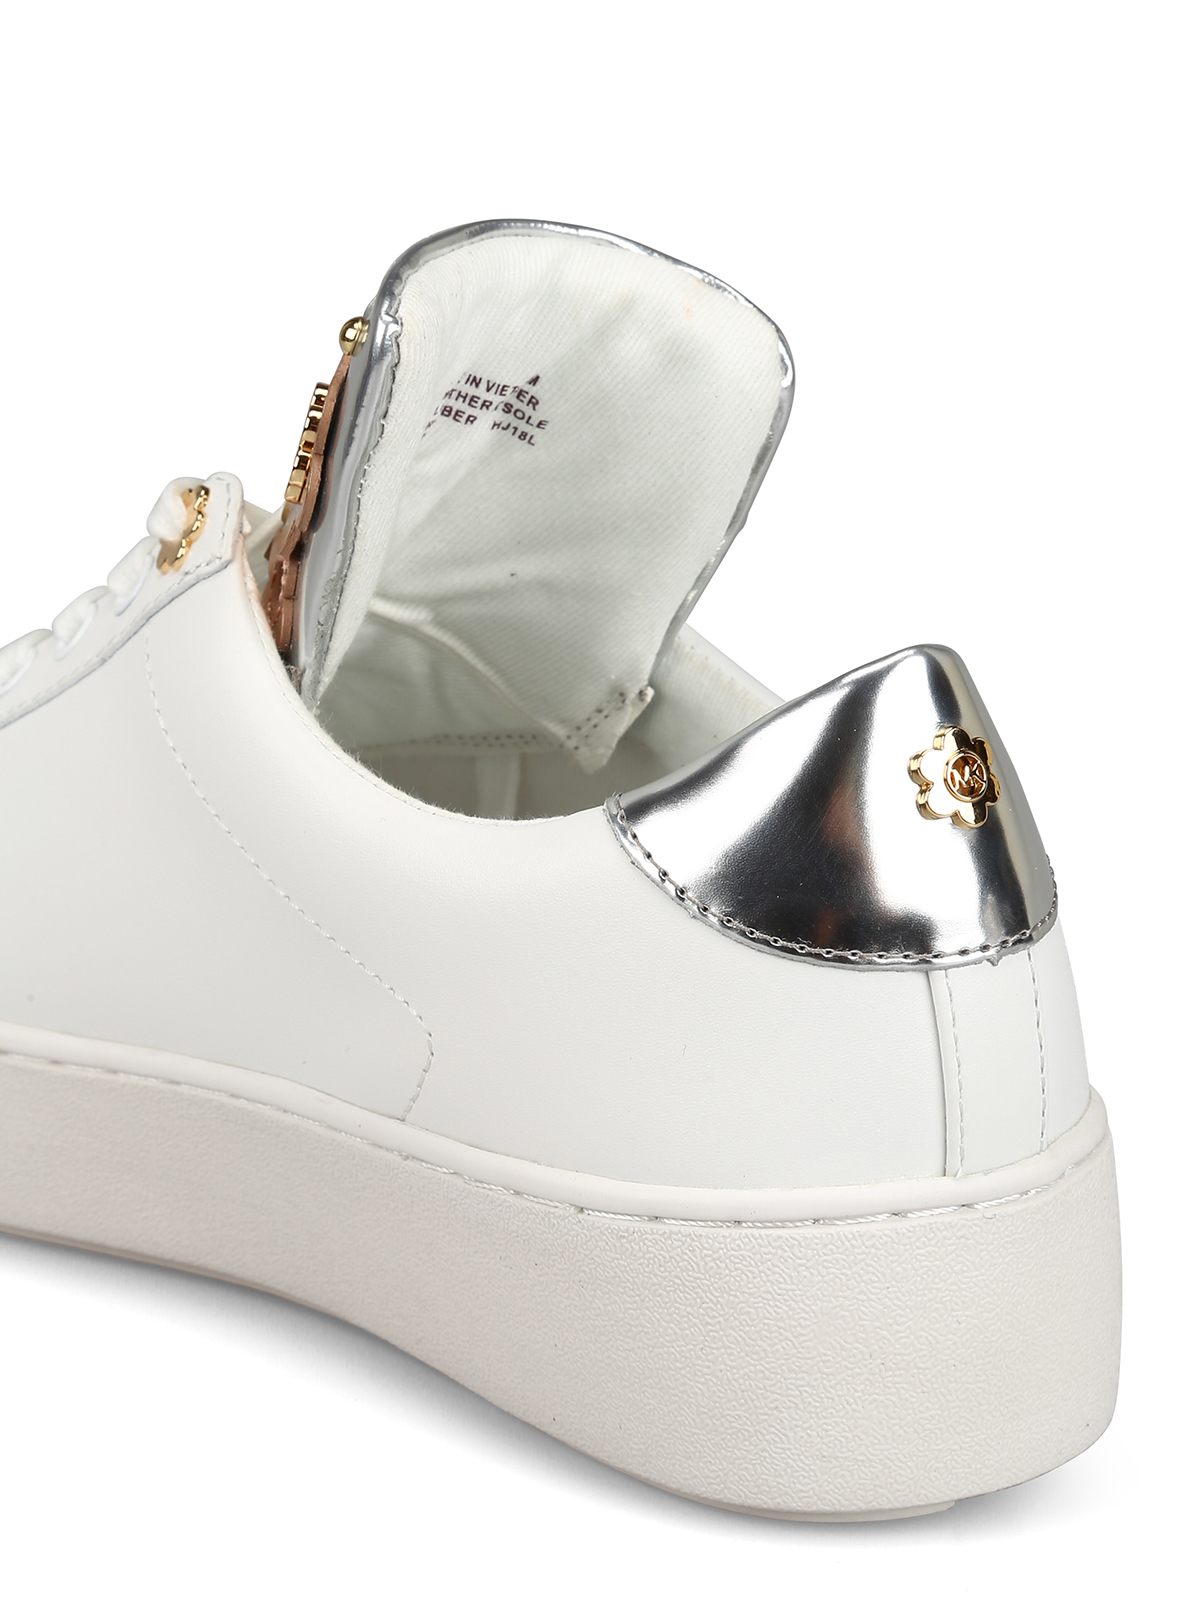 Trainers Michael Kors - Mindy white leather sneakers - 43S9MNFS5L